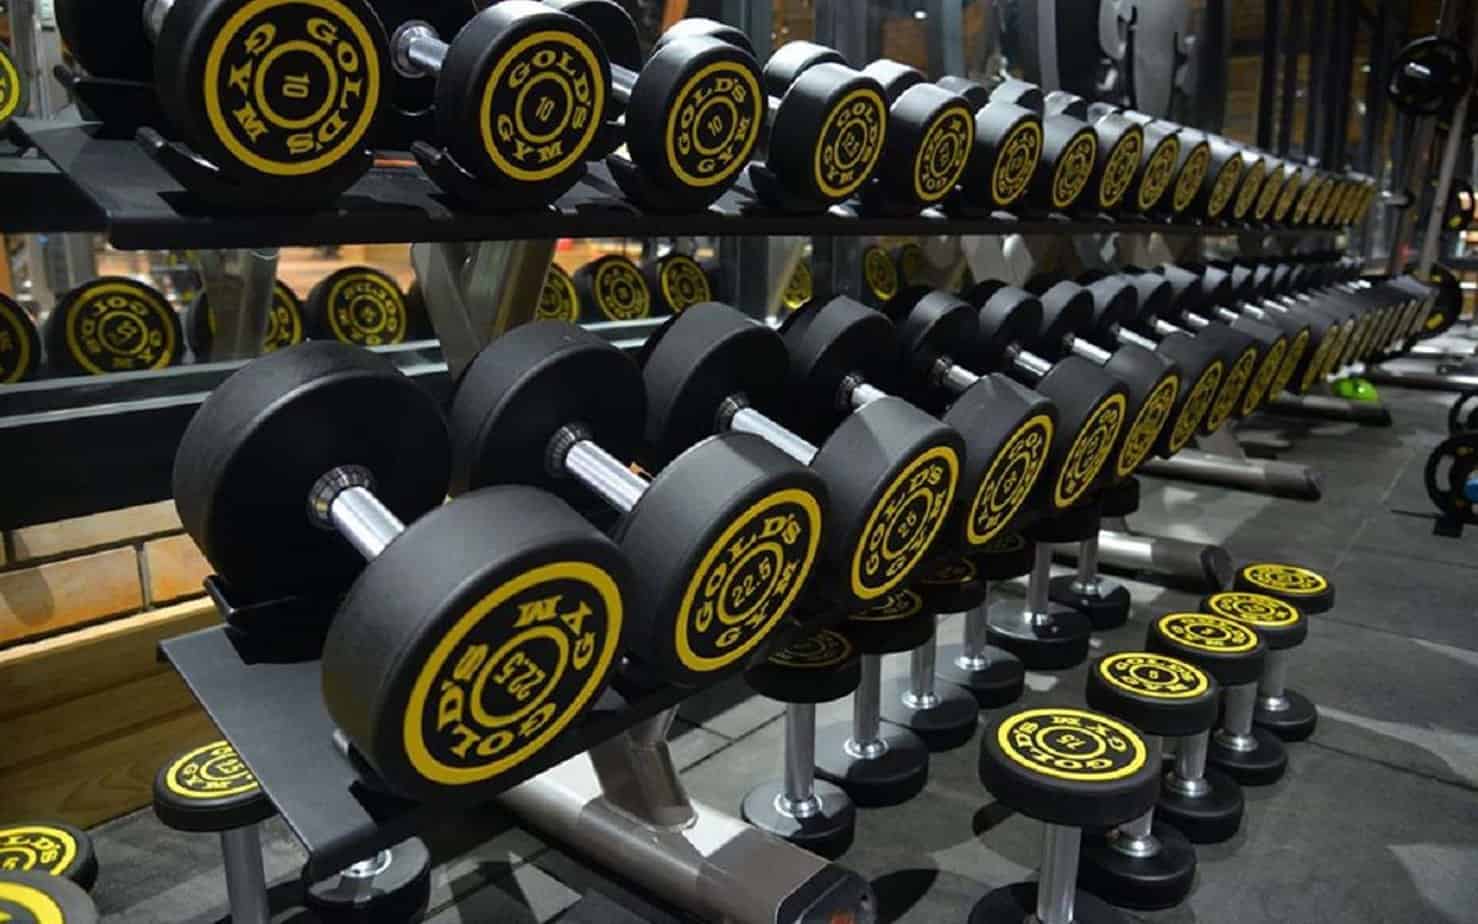 Gold's Gym Officially Files for Chapter 11 Bankruptcy